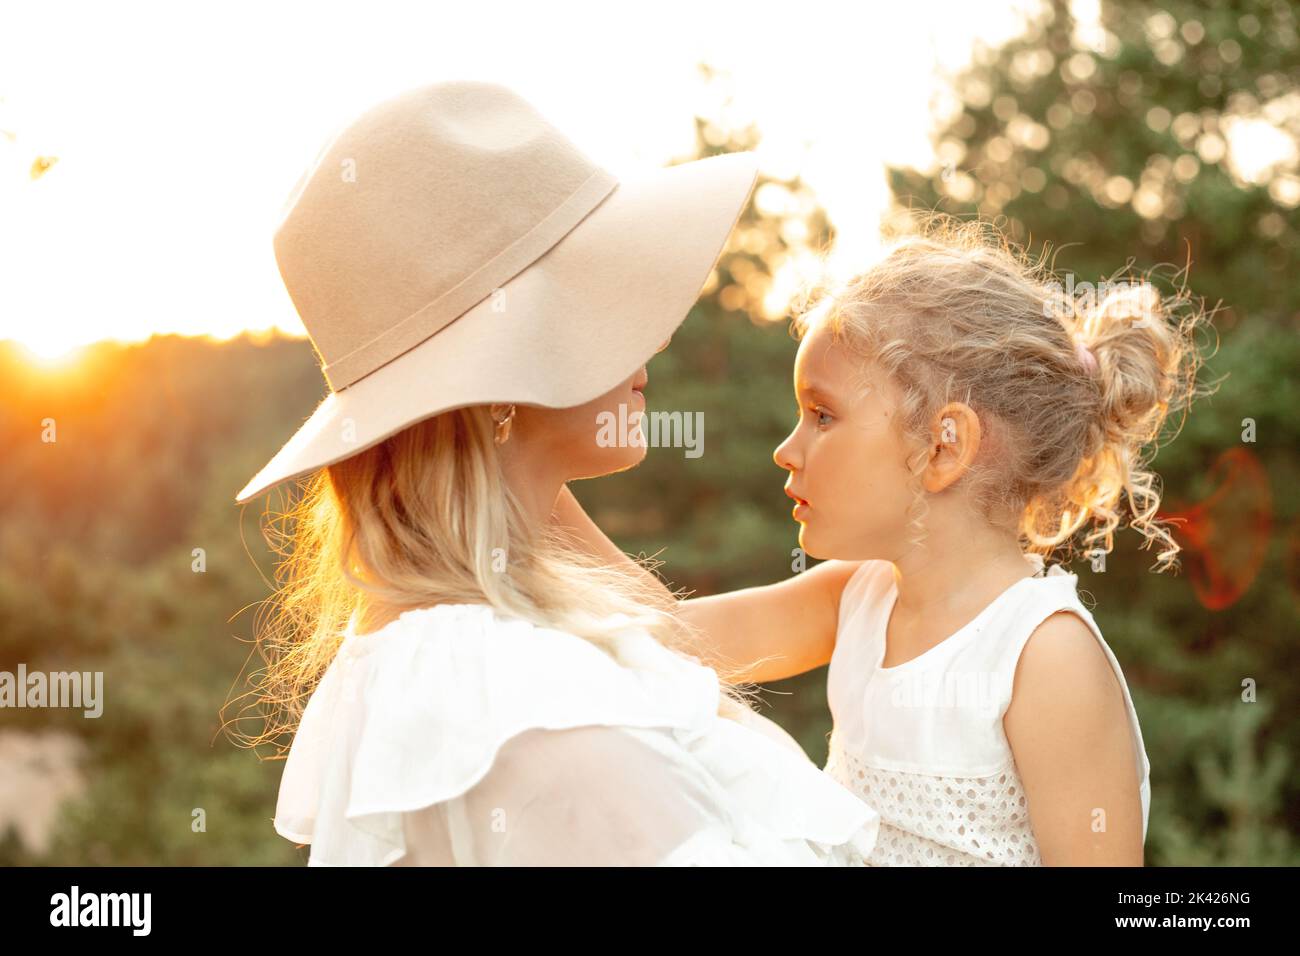 Unrecognizable smiling woman in hat embracing little blonde girl, daughter on natural blurred background. Child safety Stock Photo